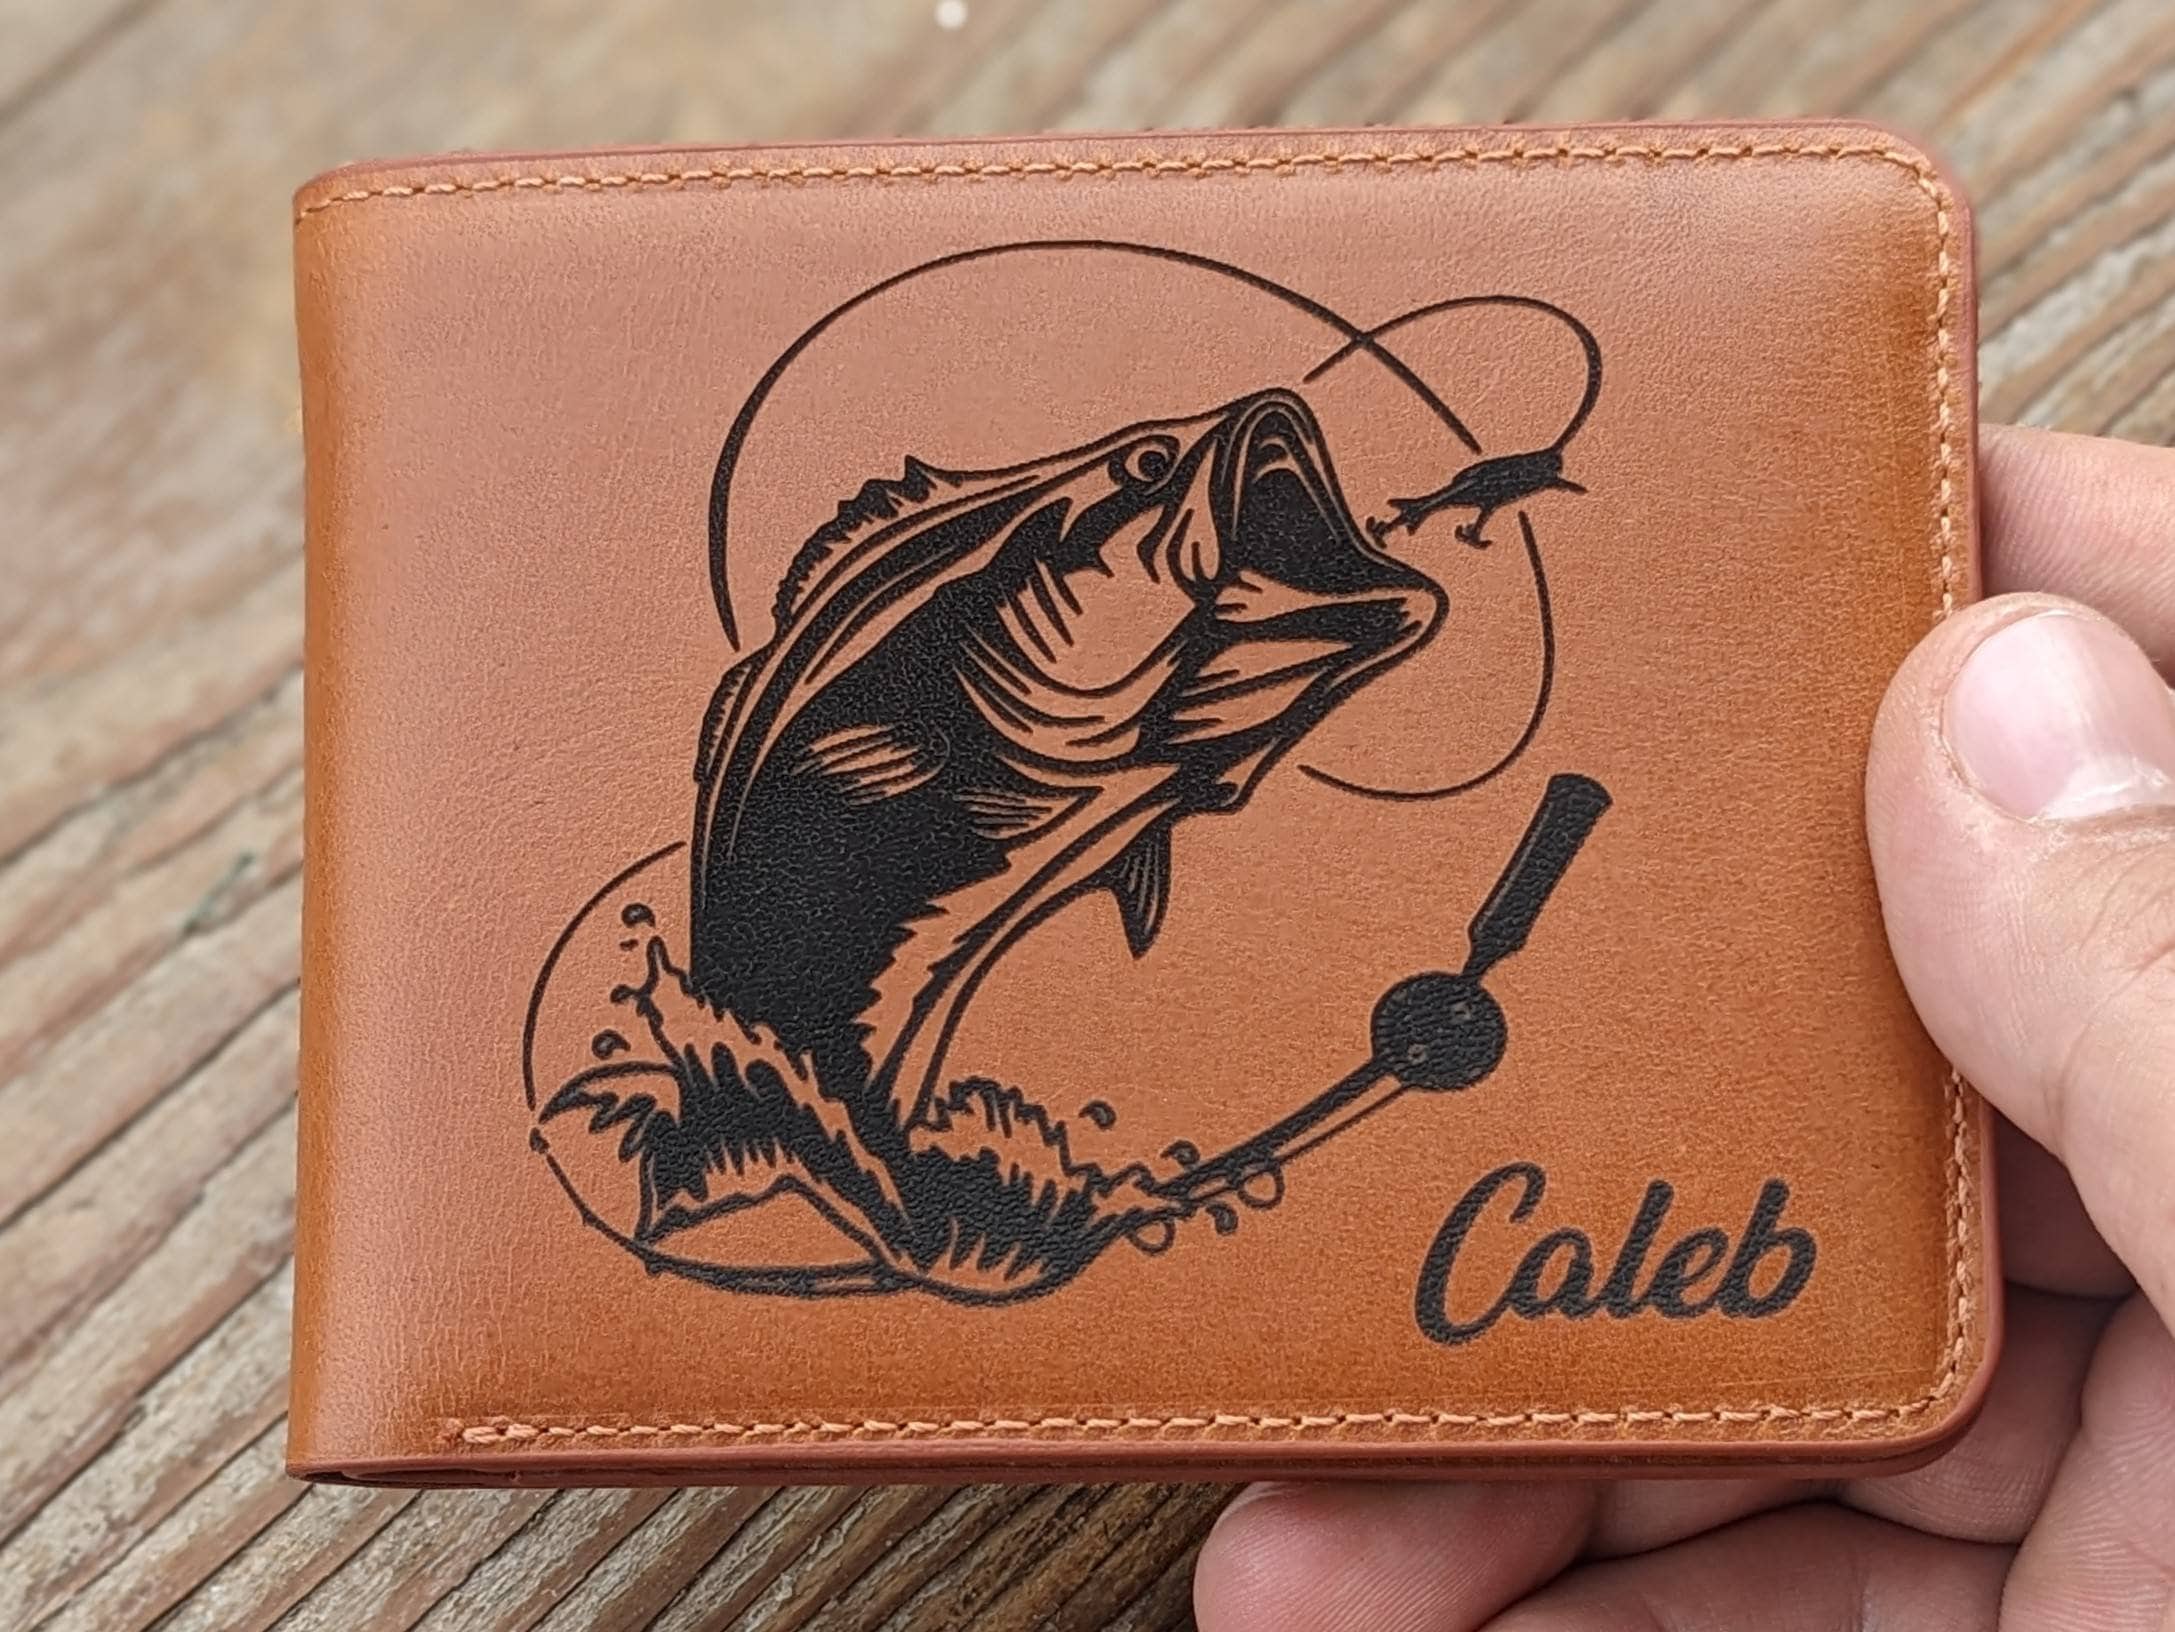  Men's 3D Genuine Leather Wallet, Money clip, Hand-Carved,  Hand-Painted, Leather Carving, Custom wallet, Personalized wallet, Puzzle :  Handmade Products